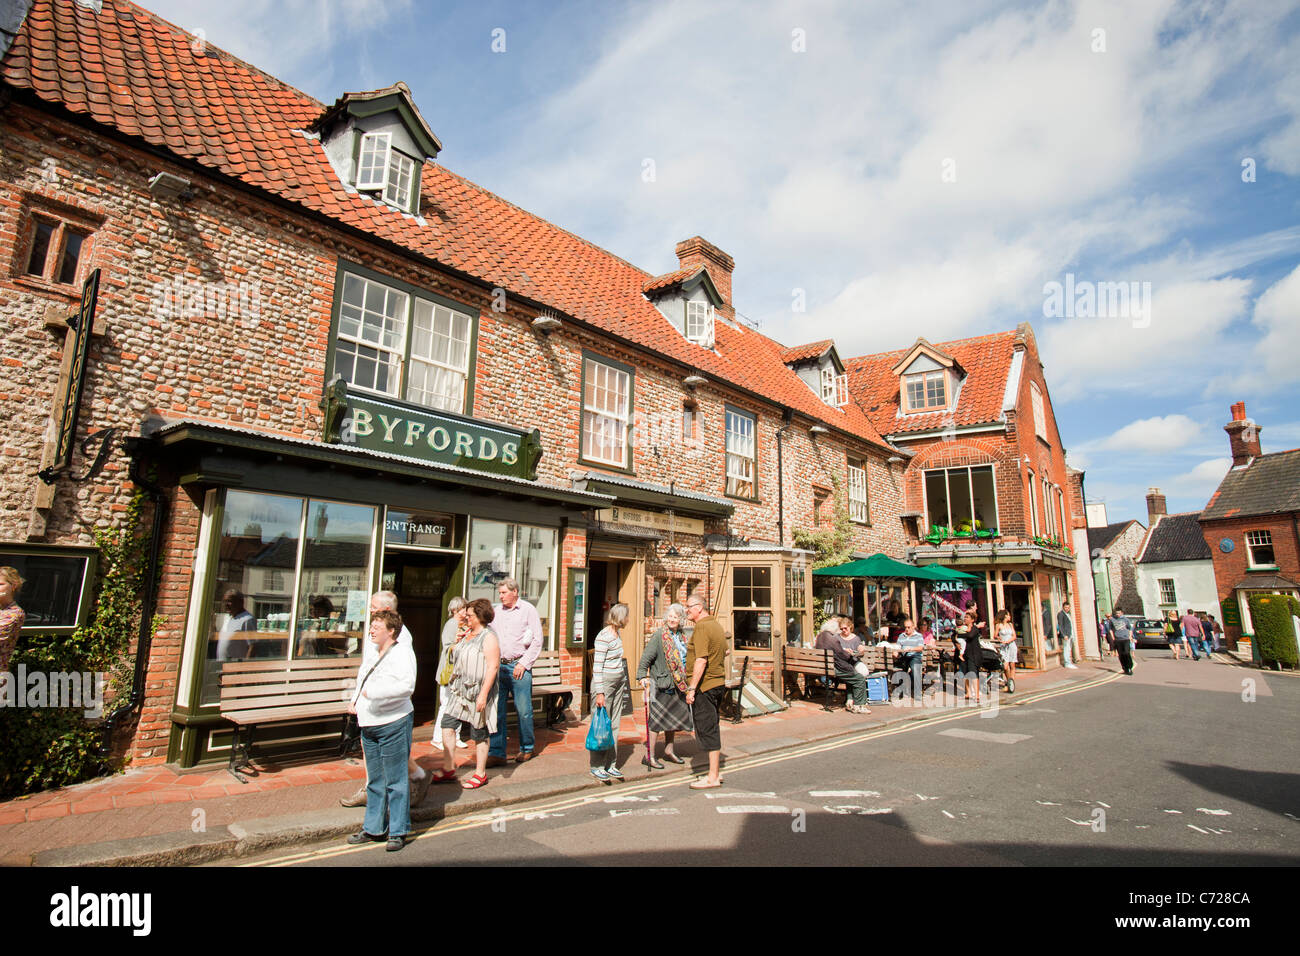 Byfords bakery and cafe in Holt, Norfolk, UK. Stock Photo